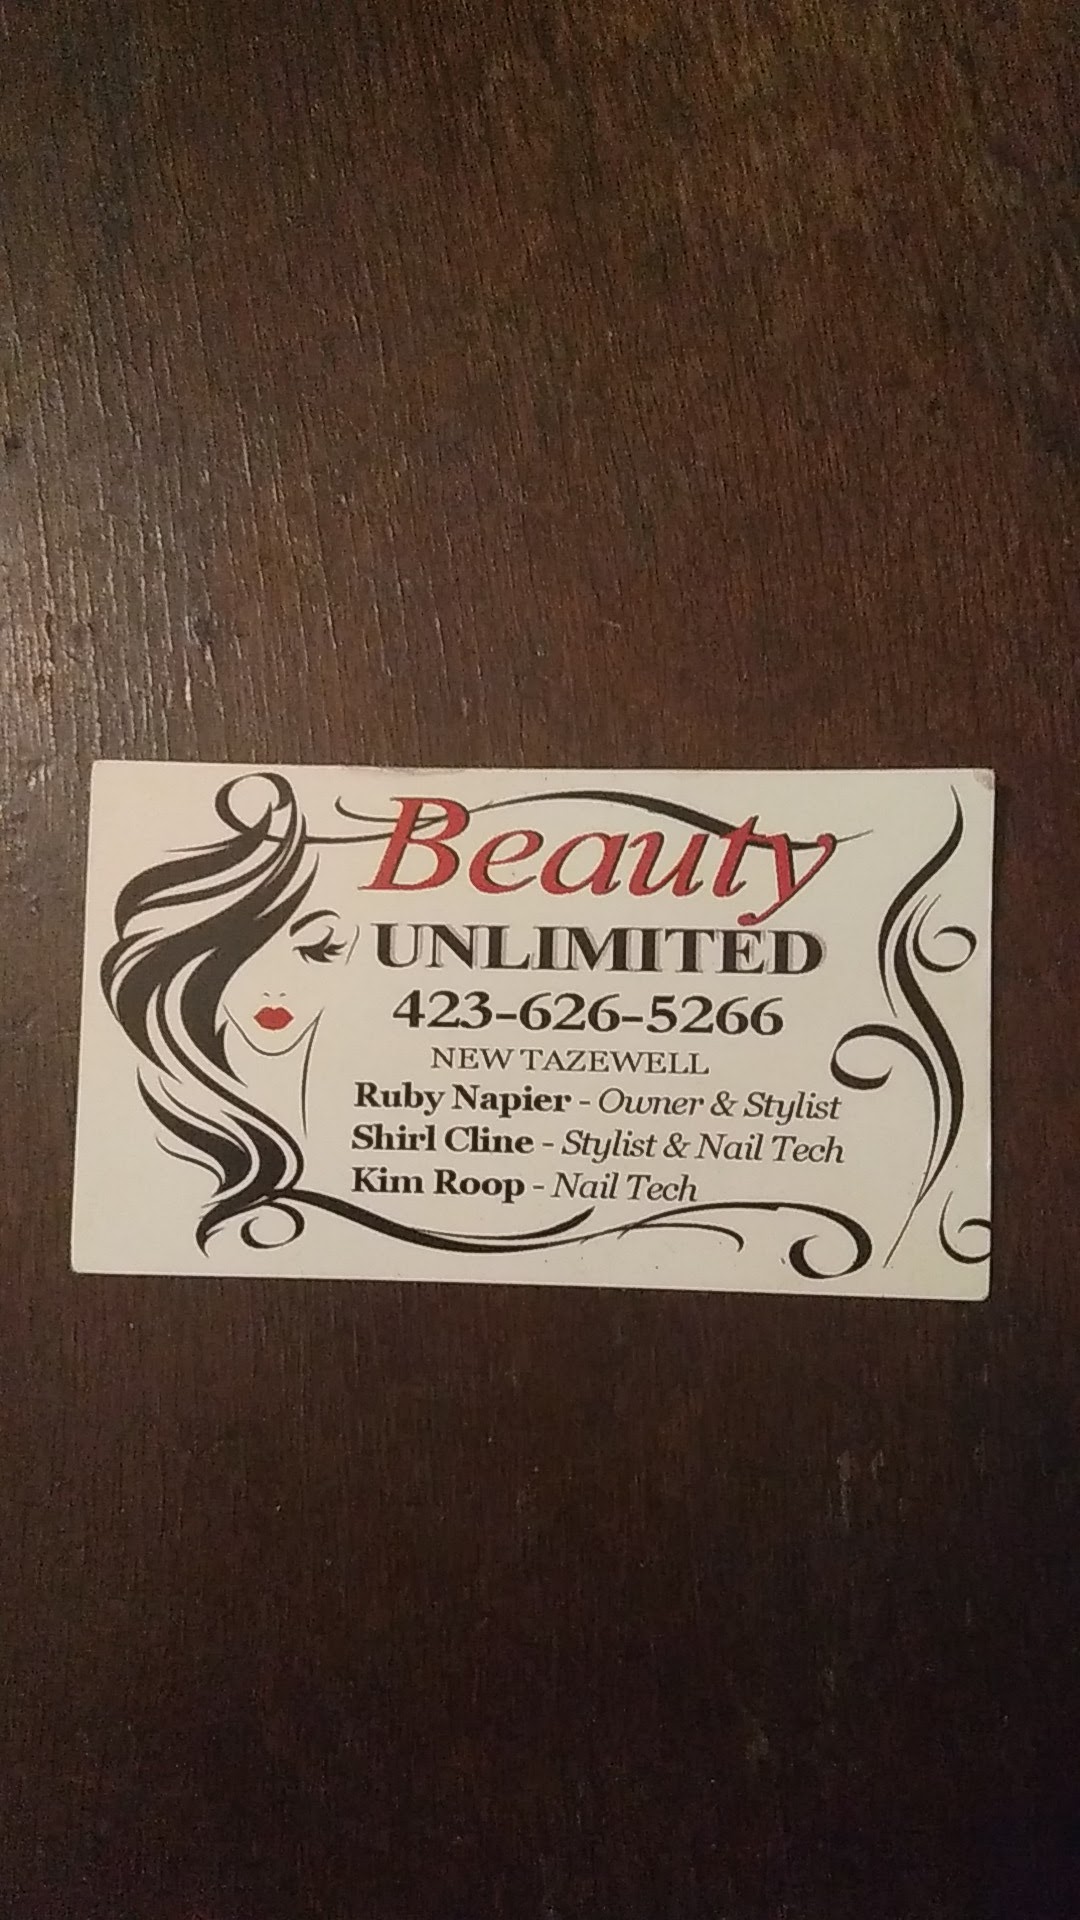 Beauty Unlimited 121 Main St, New Tazewell Tennessee 37825